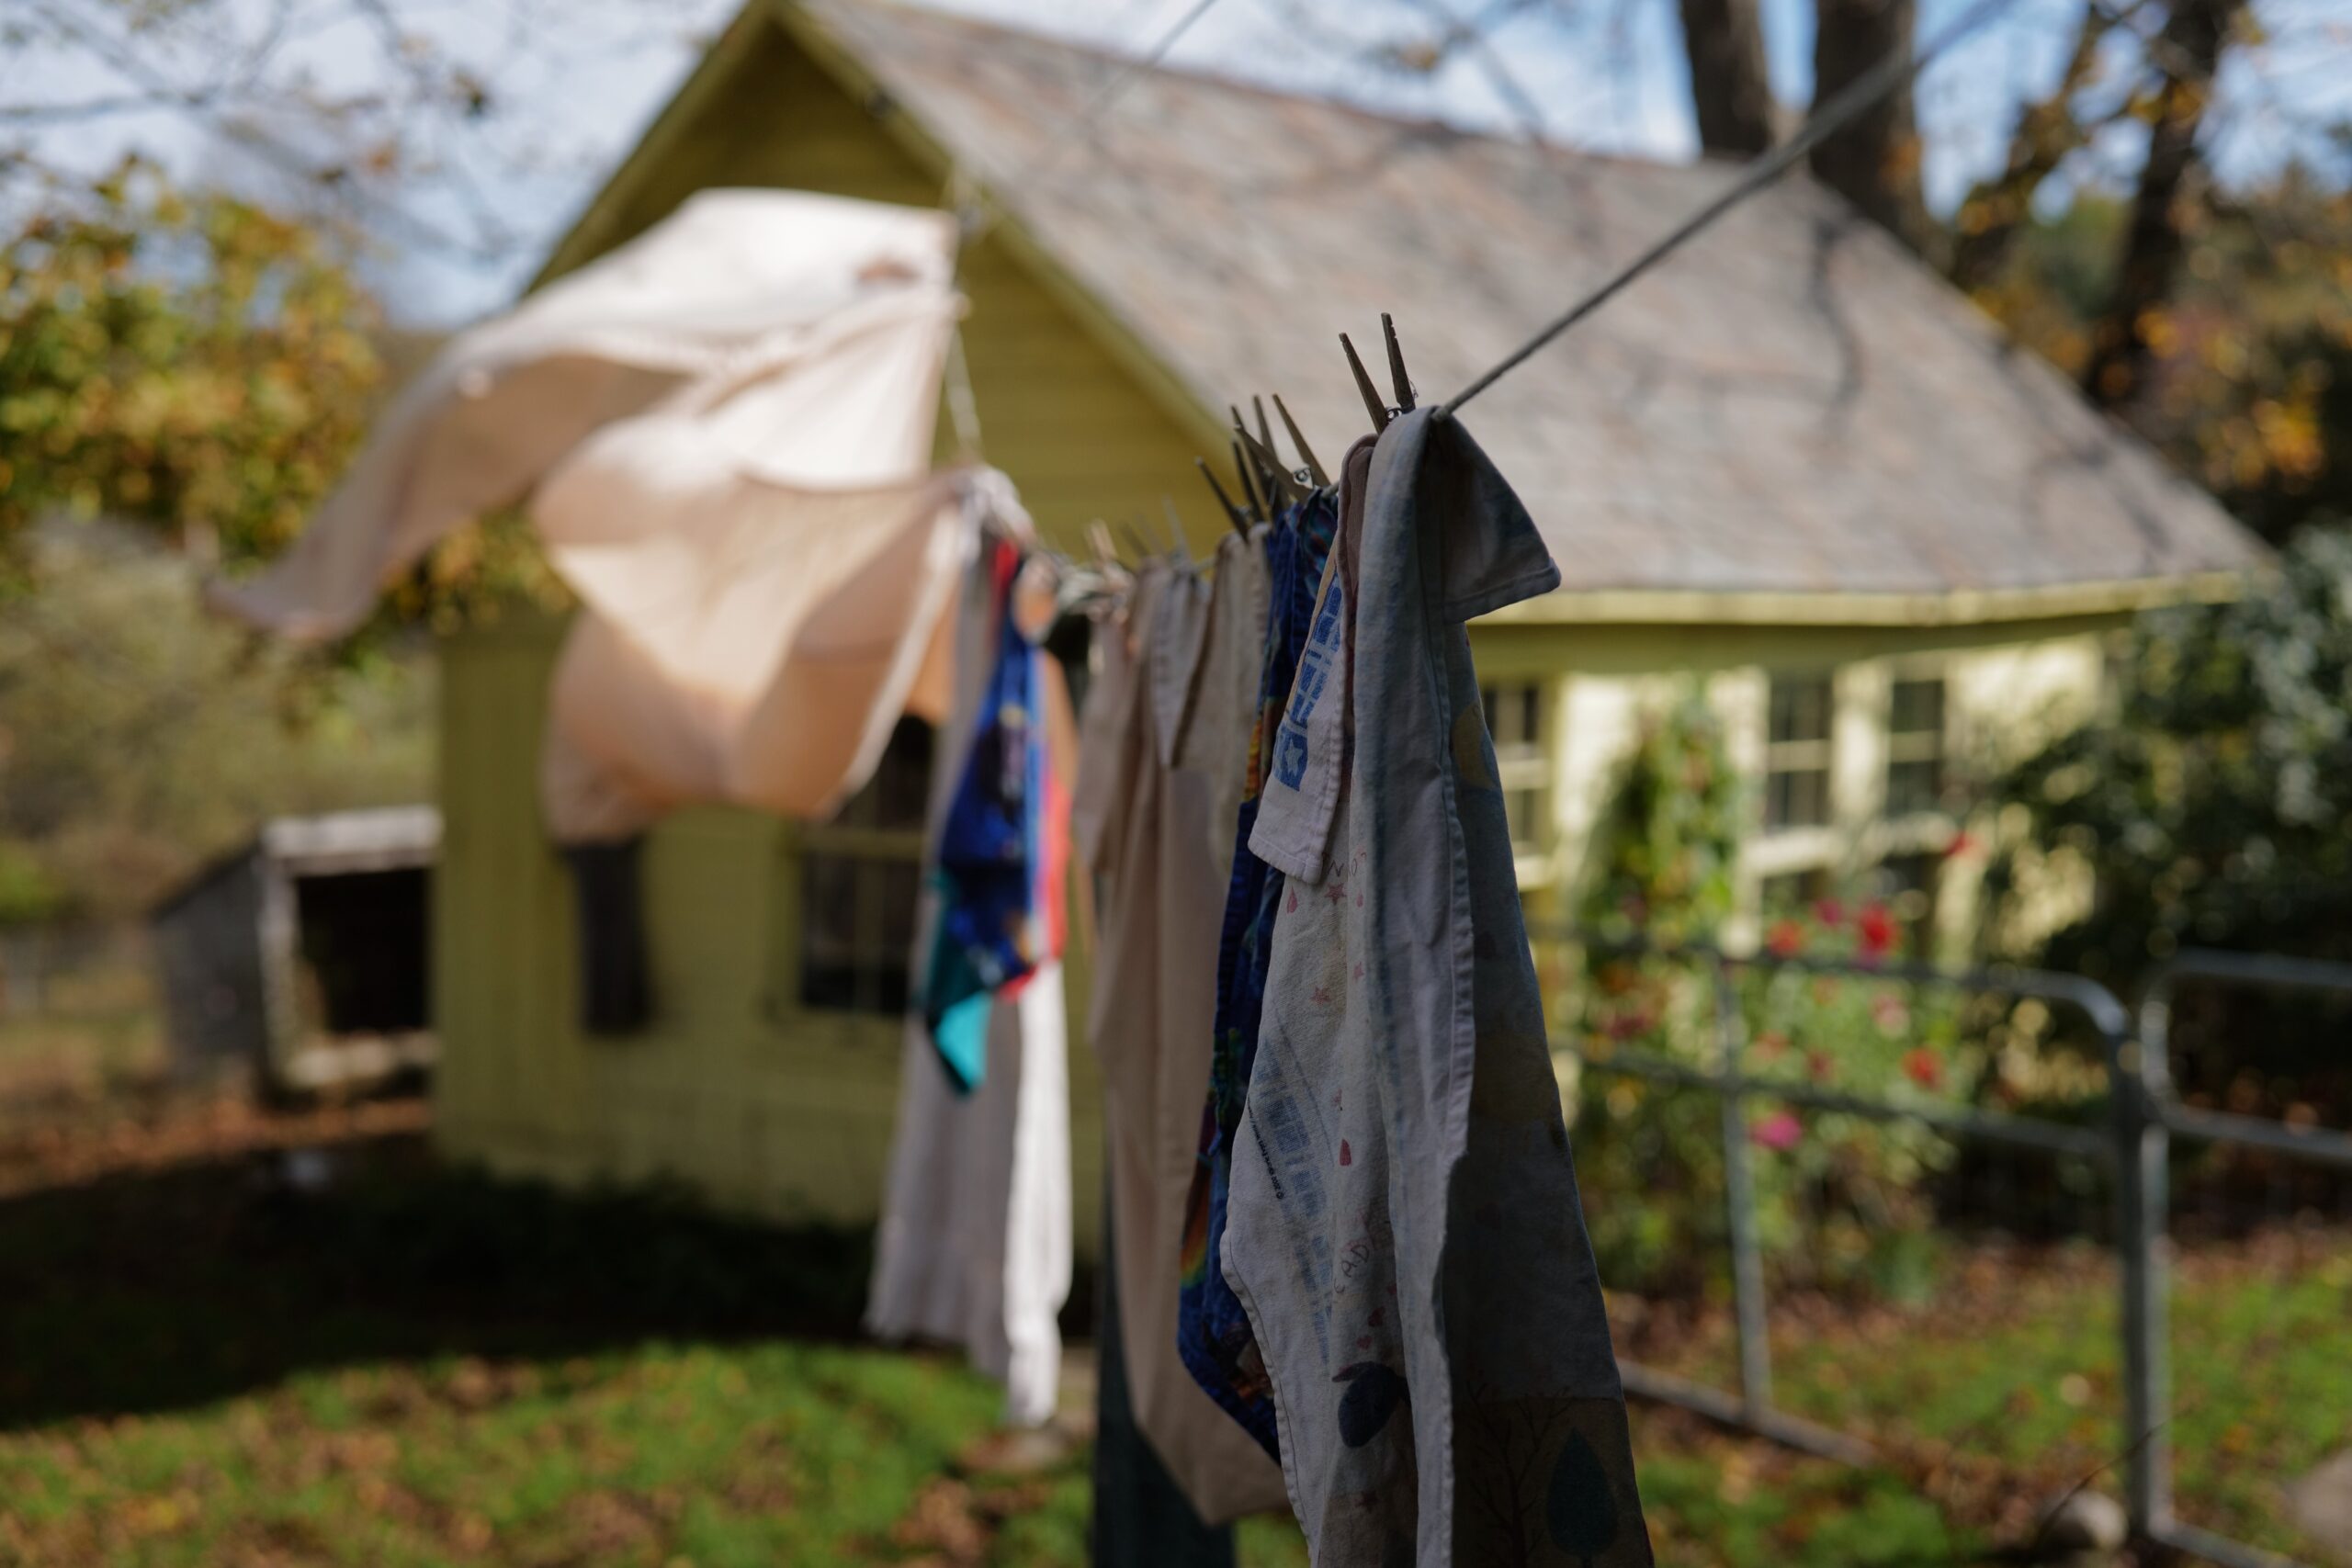 Top Tips For Line-Drying Clothes The Right Way - Farmers' Almanac